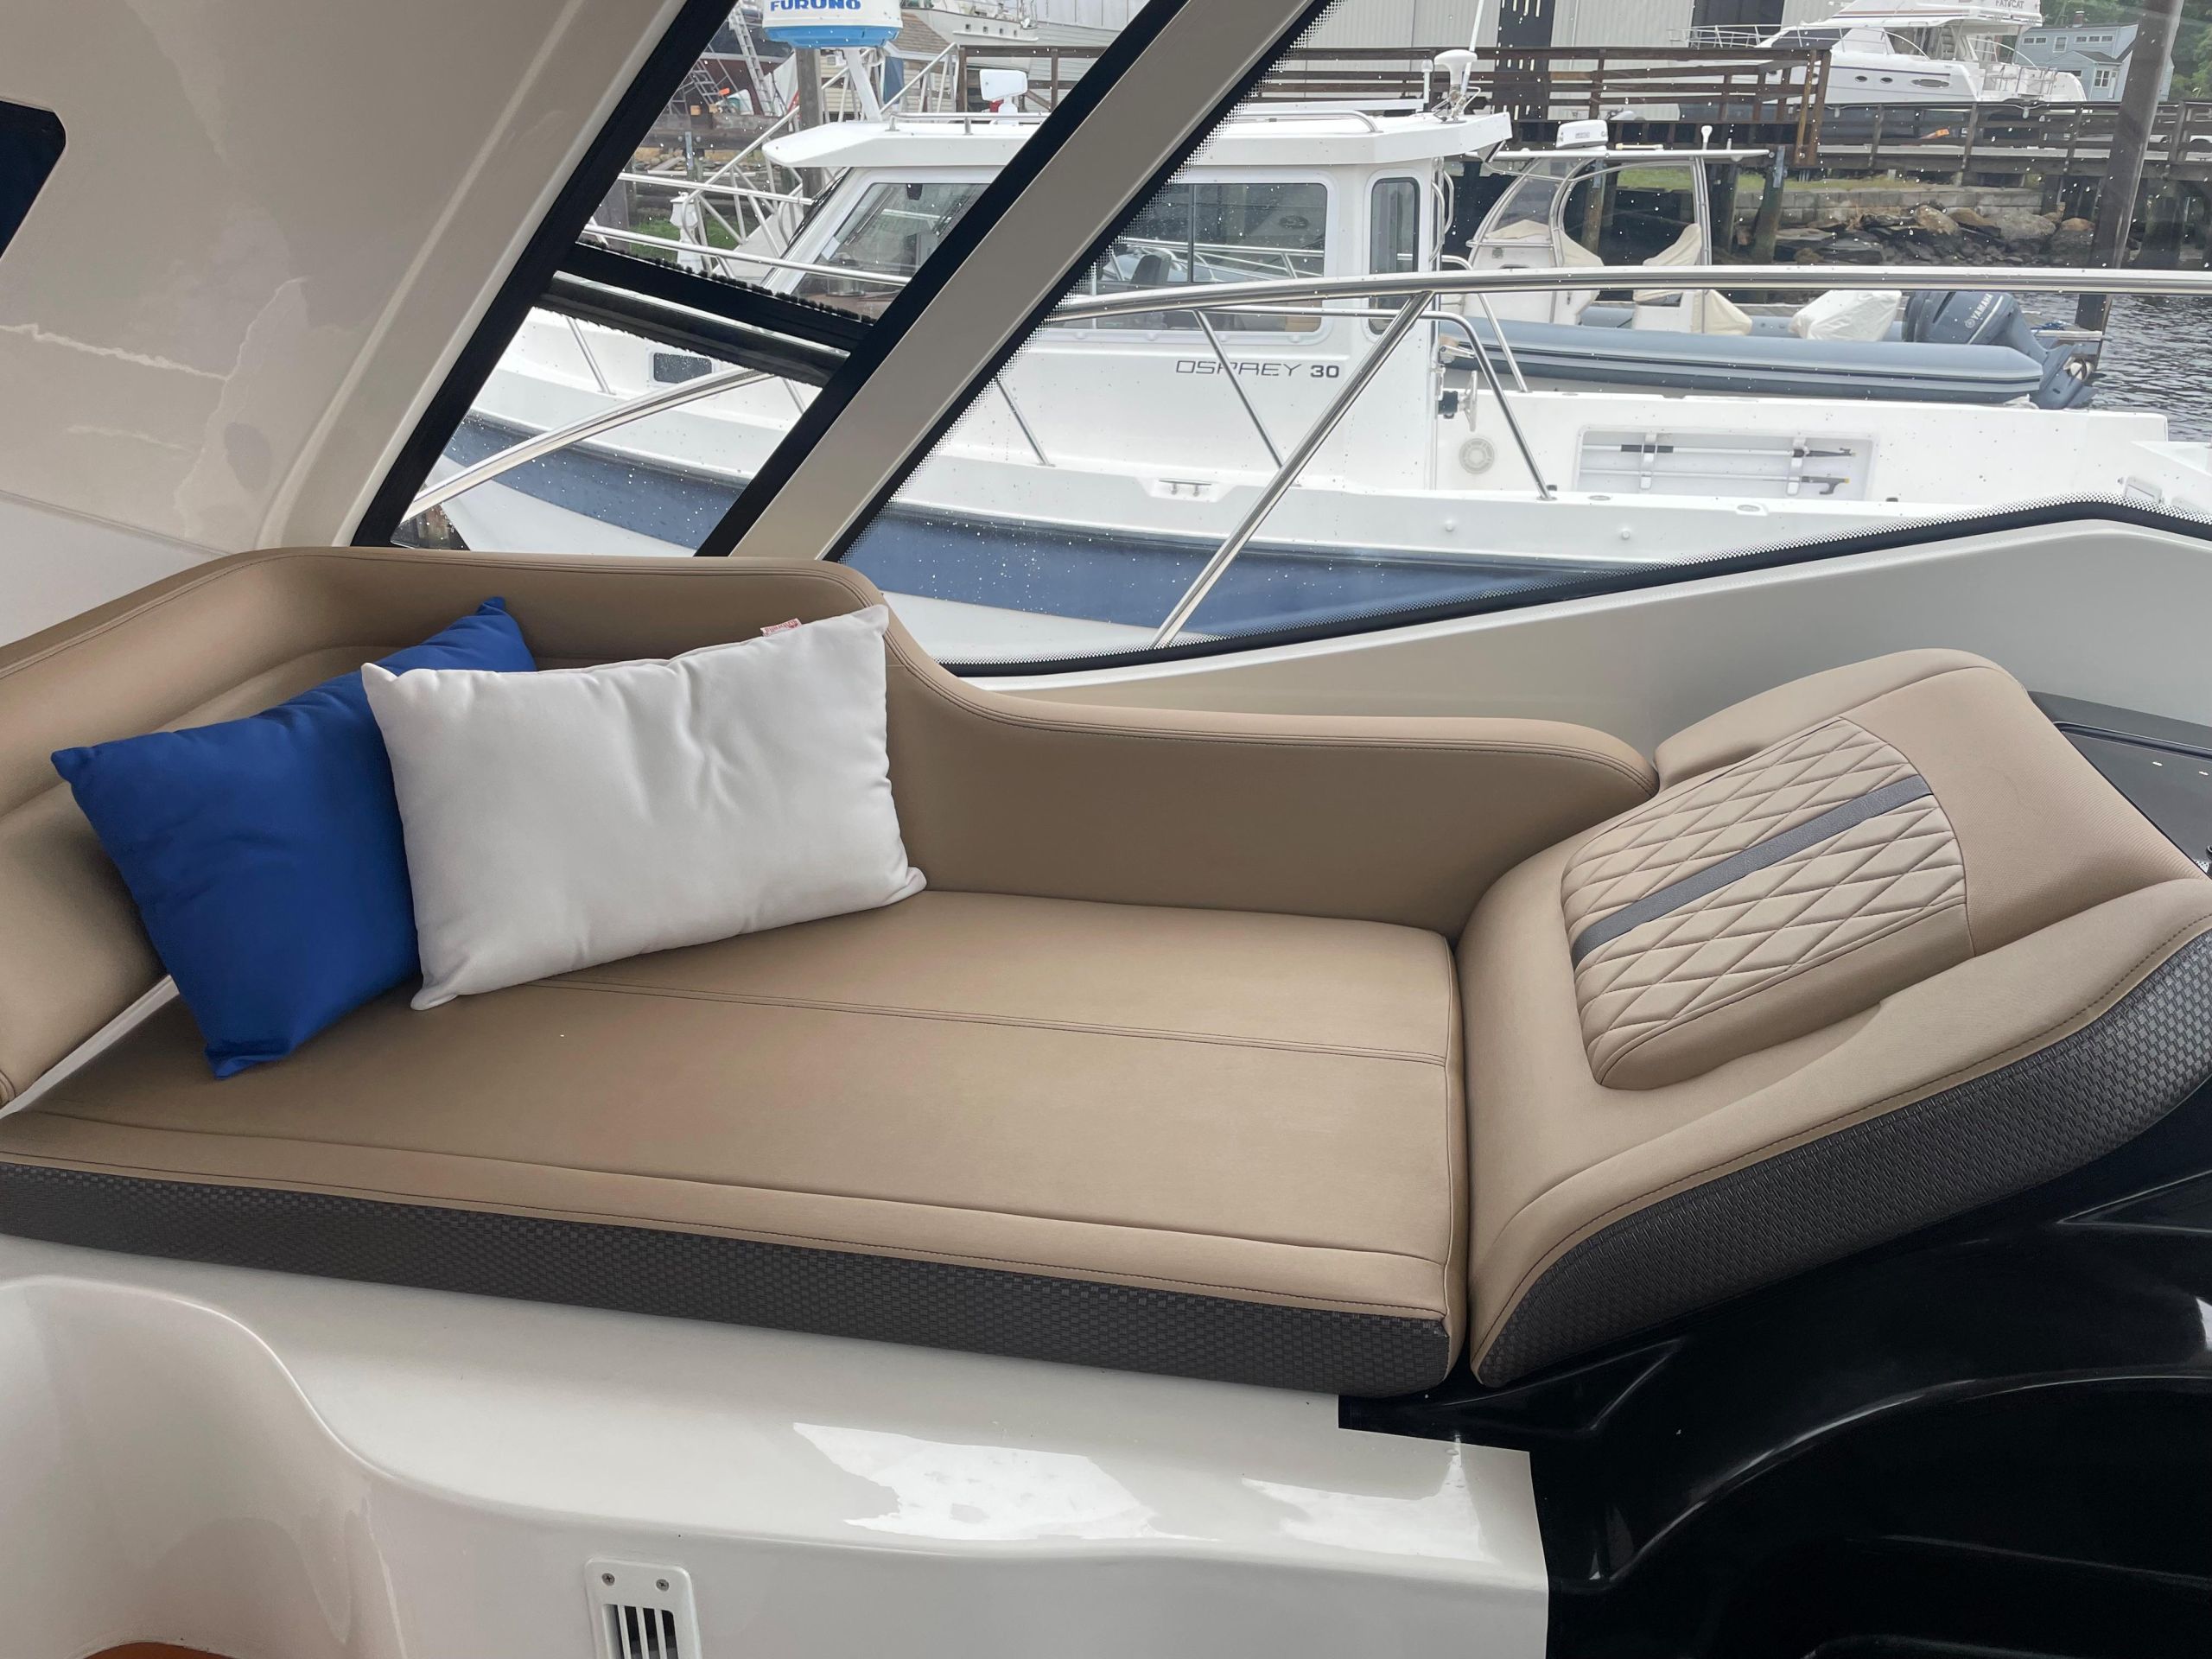 New Central Listing: 2017 Sea Ray 350 Sundancer Coupe – “Blue Ridge” – For Sale & Located in Quincy, MA